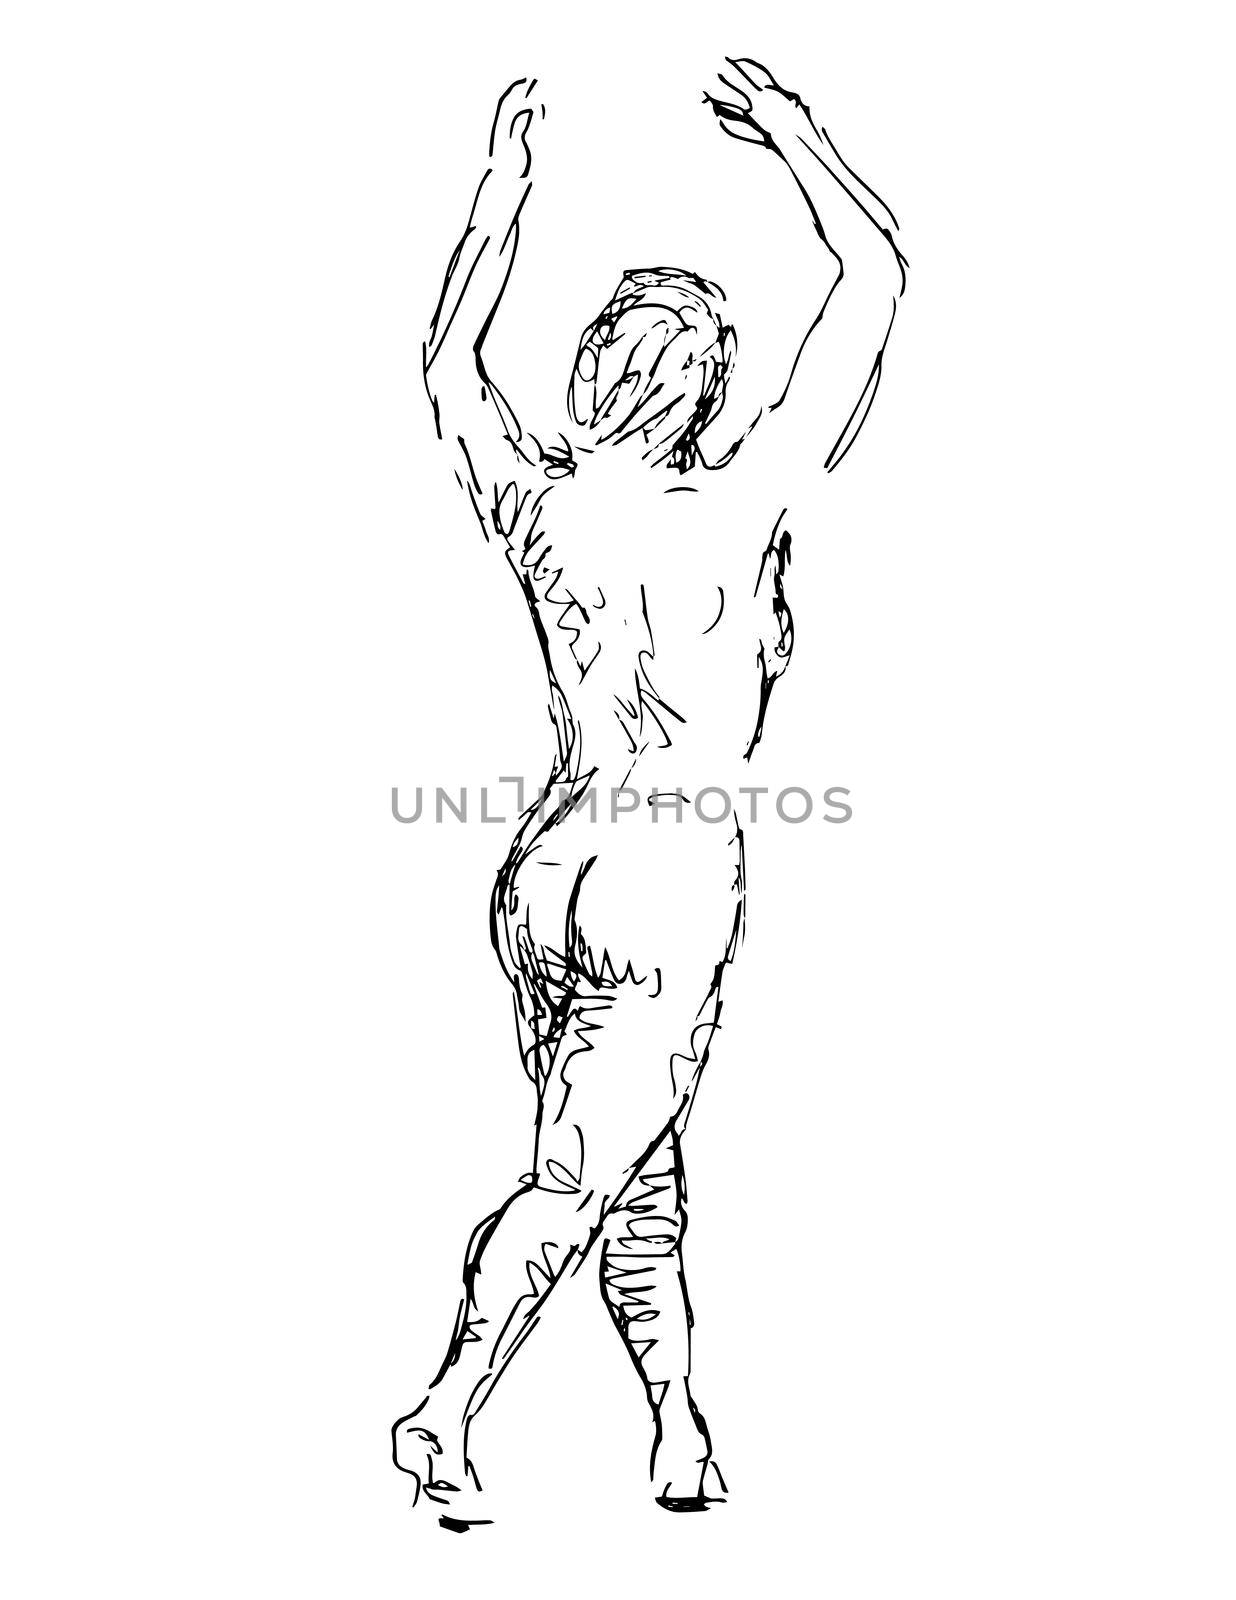 Nude Female Human Figure Standing With Hands Up Rear View Doodle Art Line Drawing  by patrimonio